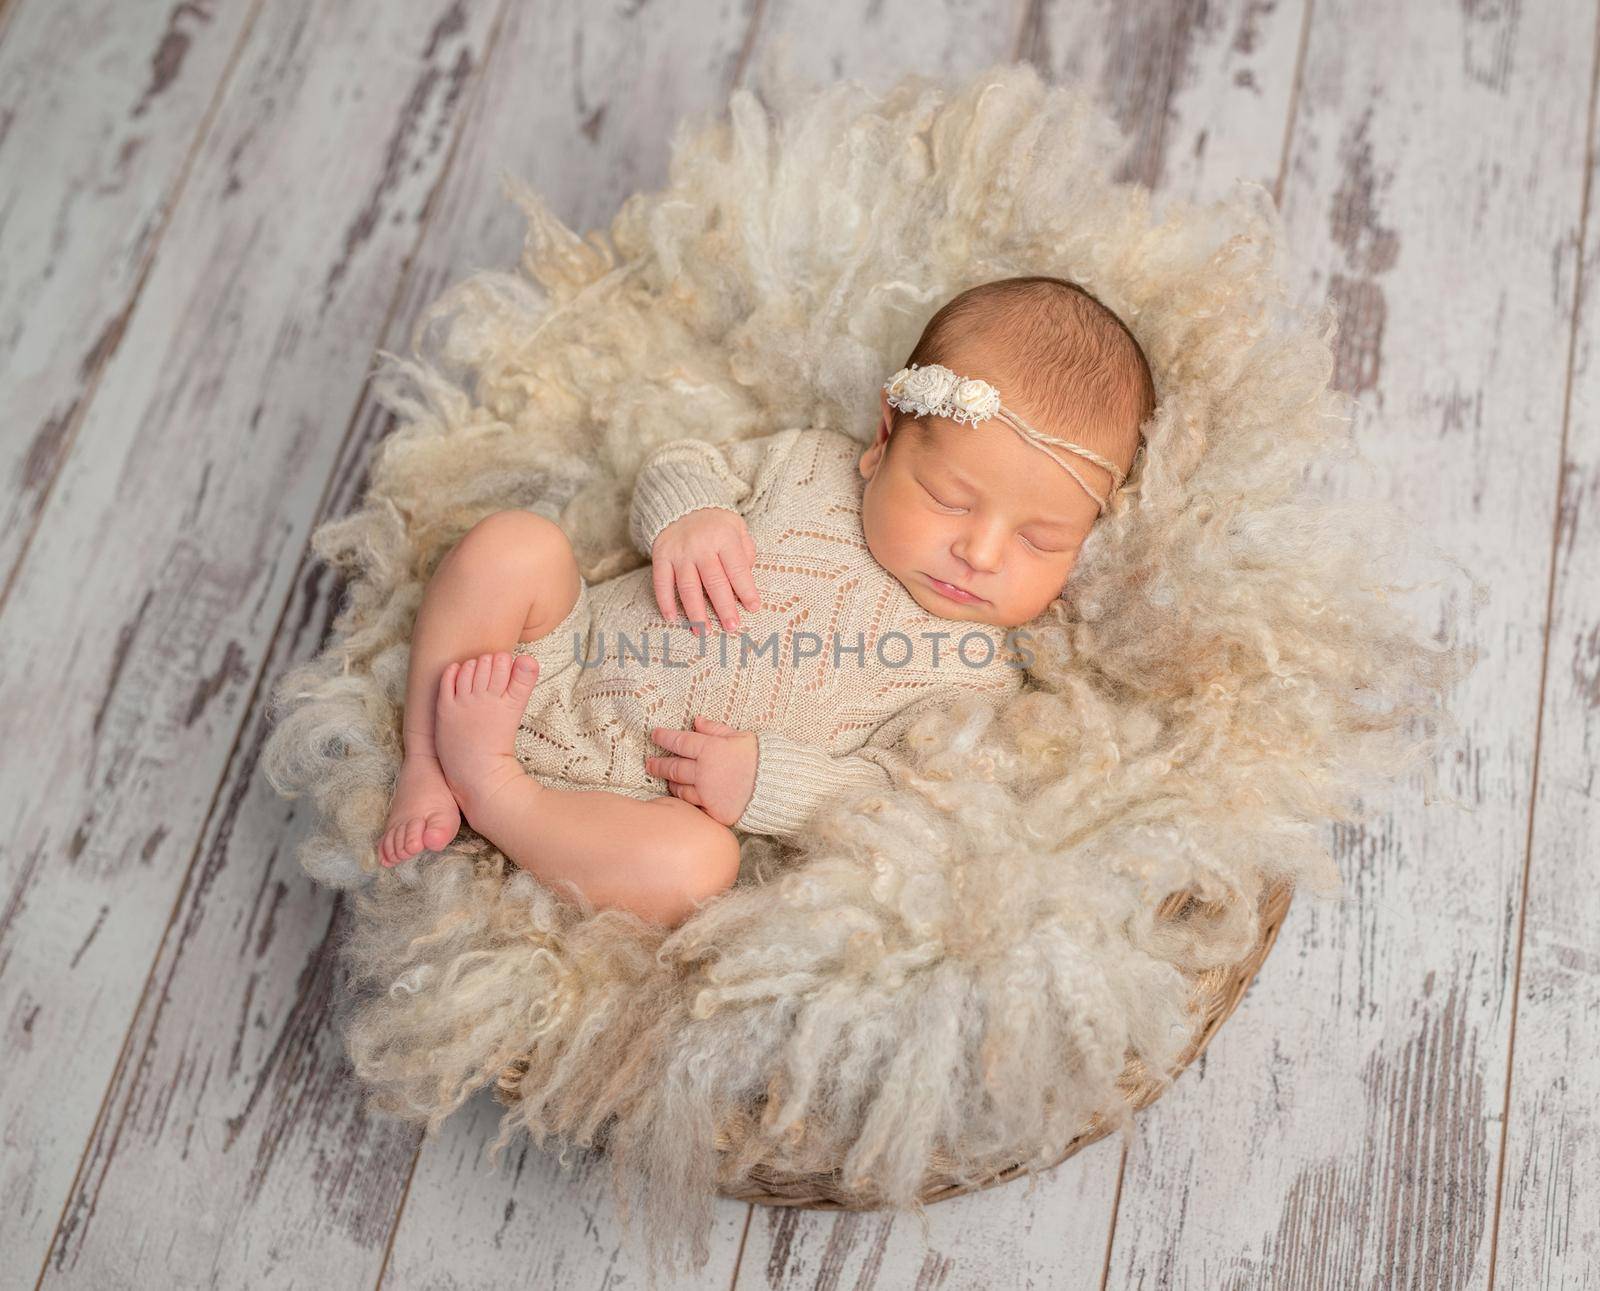 lovely sleeping newborn baby in knitted jumpsuit in basket with fluffy blanket